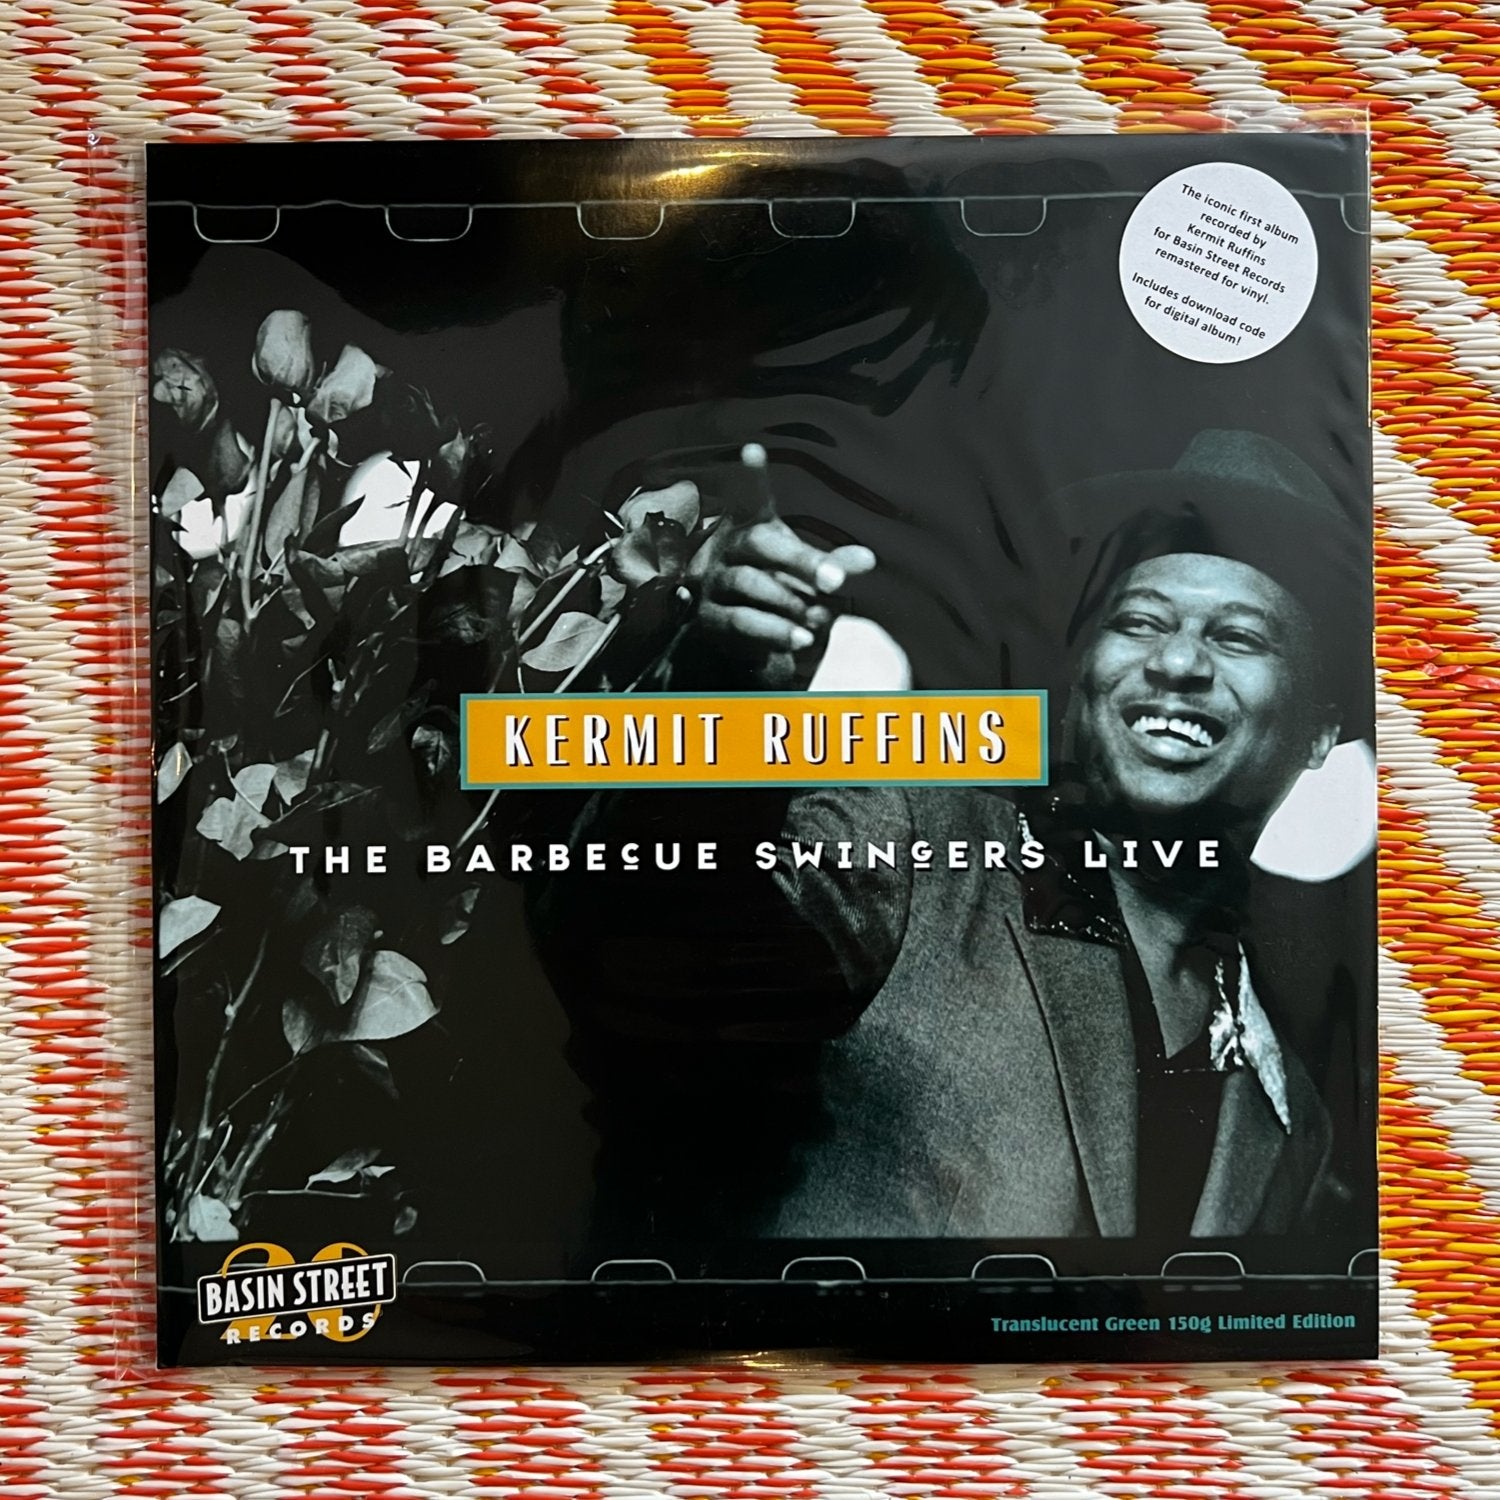 Kermit Ruffins, The Barbecue Swingers Live - Dirty Coast Press